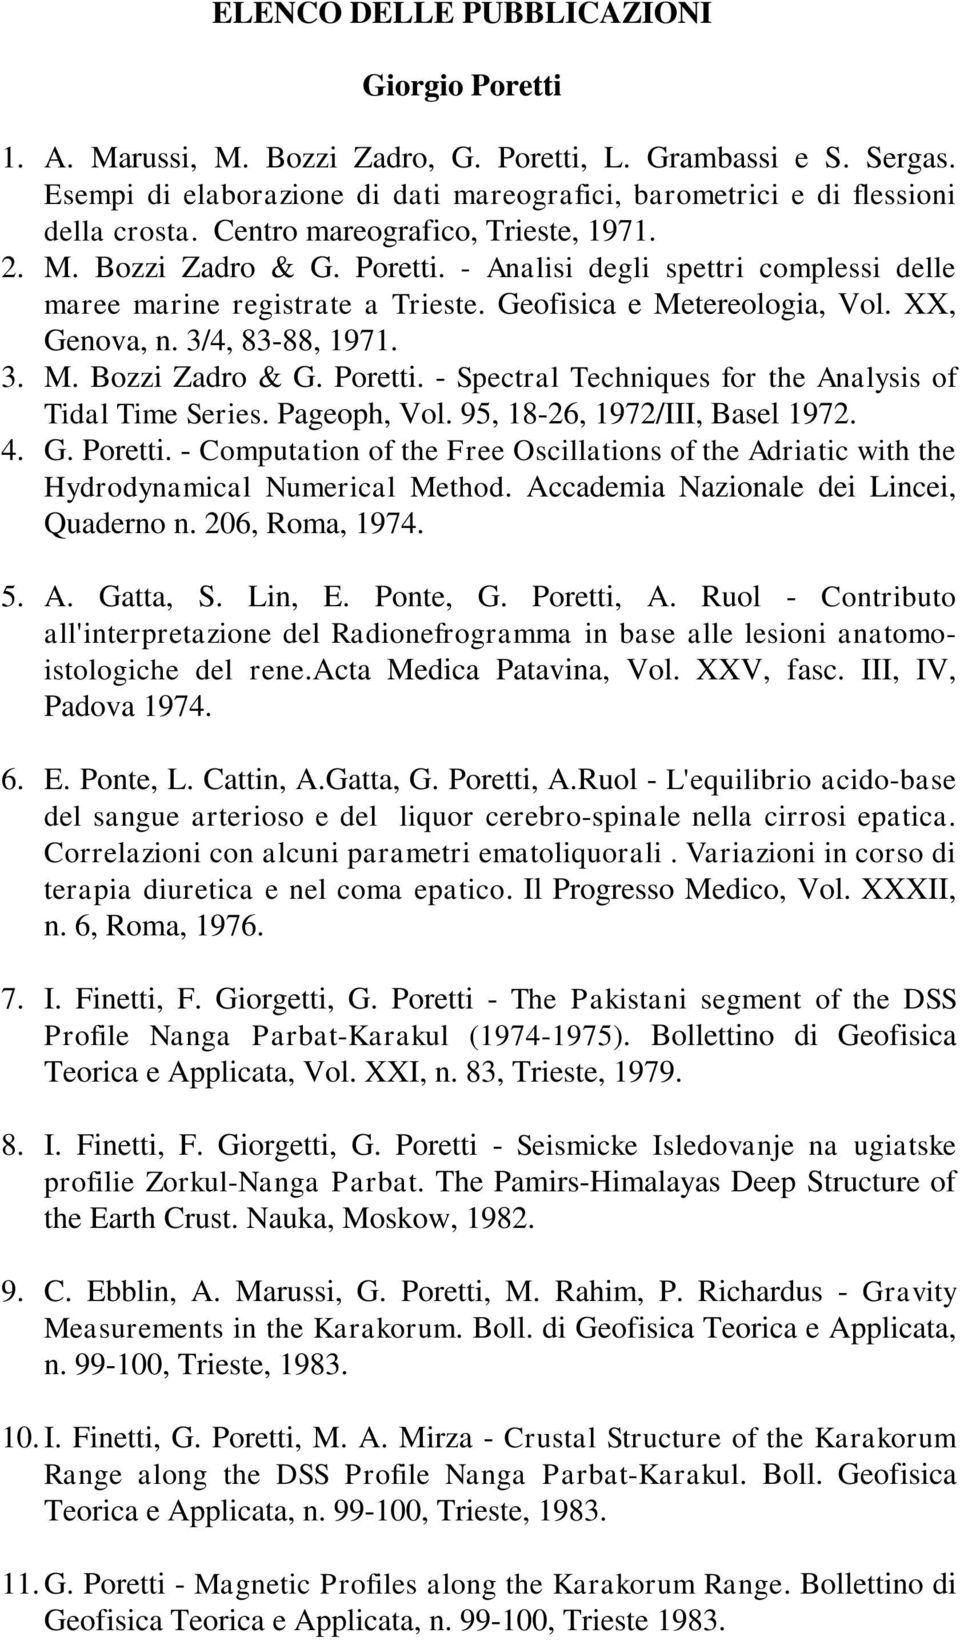 3/4, 83-88, 1971. 3. M. Bozzi Zadro & G. Poretti. - Spectral Techniques for the Analysis of Tidal Time Series. Pageoph, Vol. 95, 18-26, 1972/III, Basel 1972. 4. G. Poretti. - Computation of the Free Oscillations of the Adriatic with the Hydrodynamical Numerical Method.